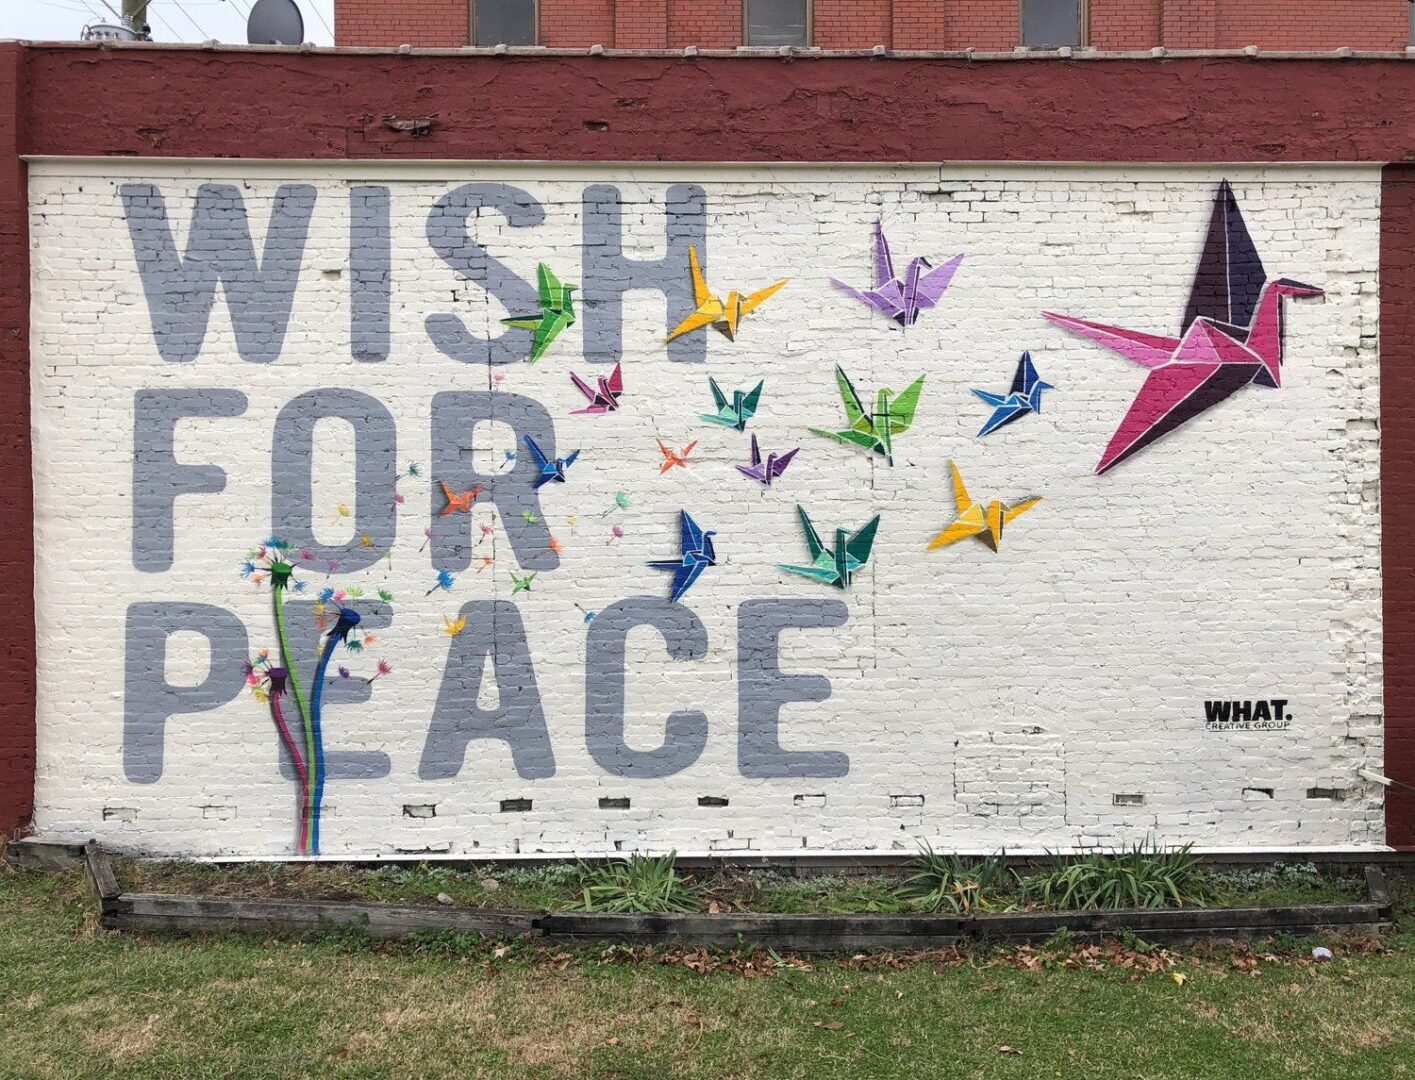 Wish for Peace